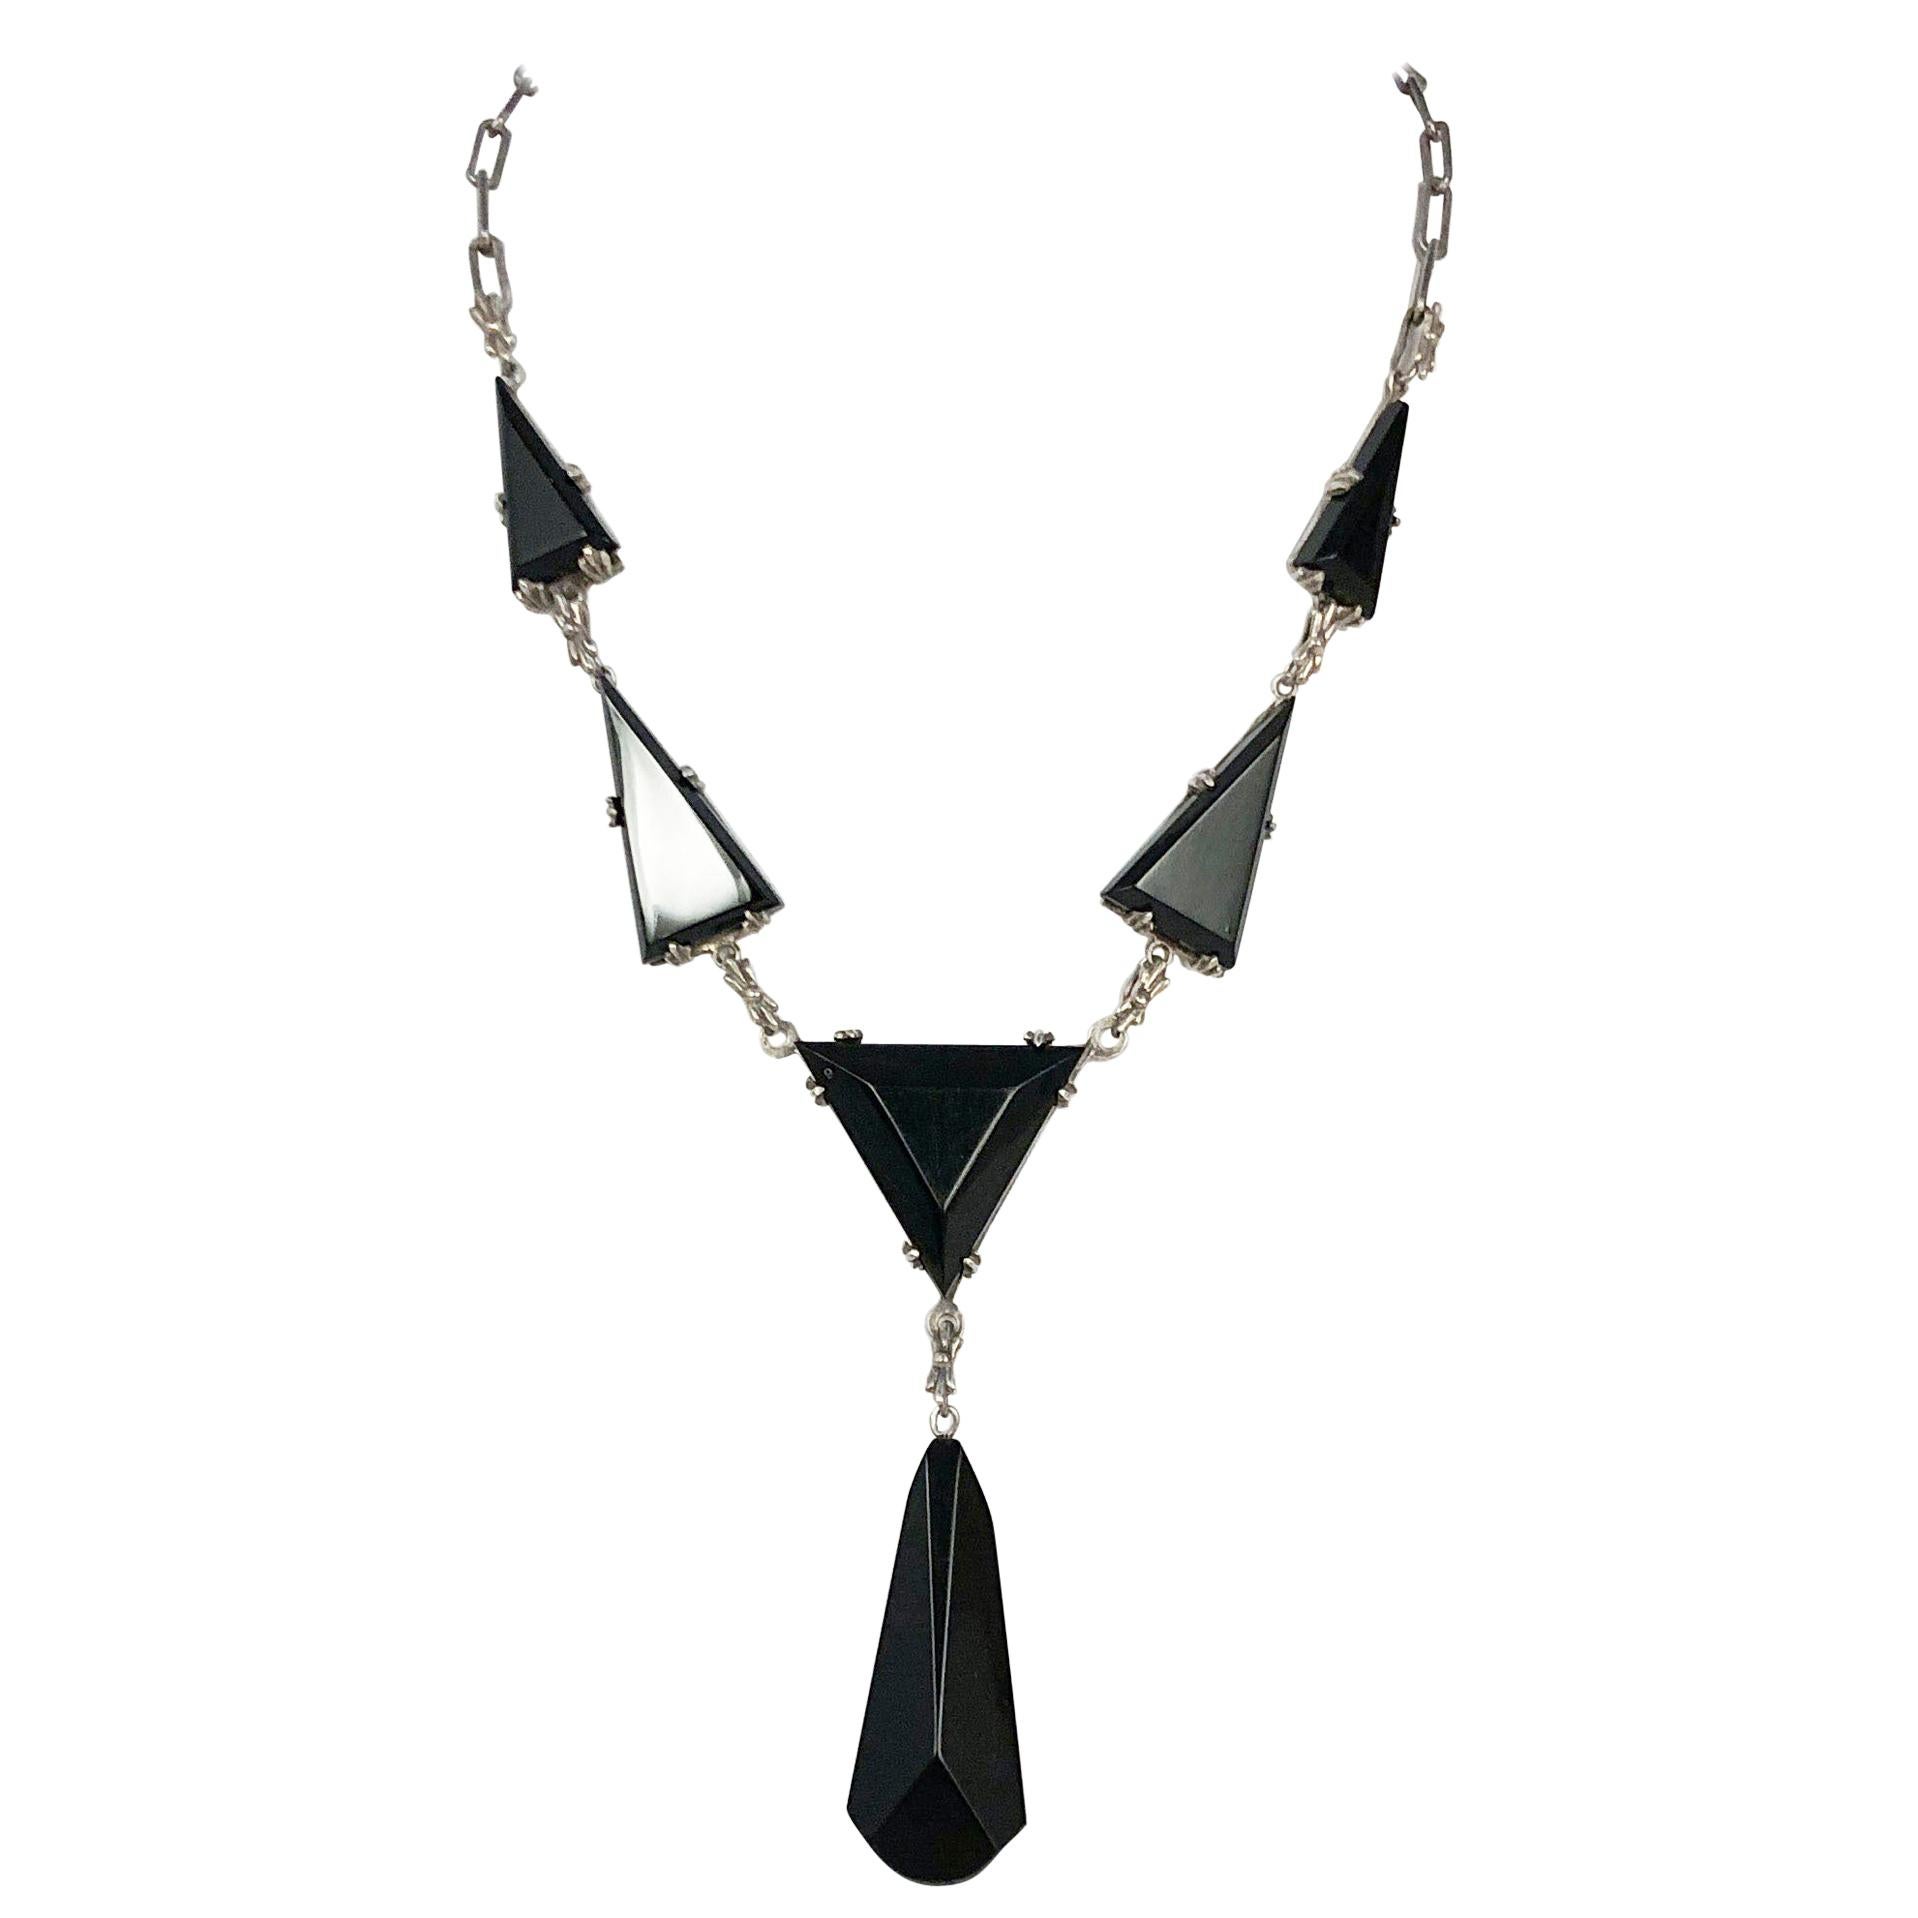 1930s Deco Onyx, Bakelite, and Silver Necklace